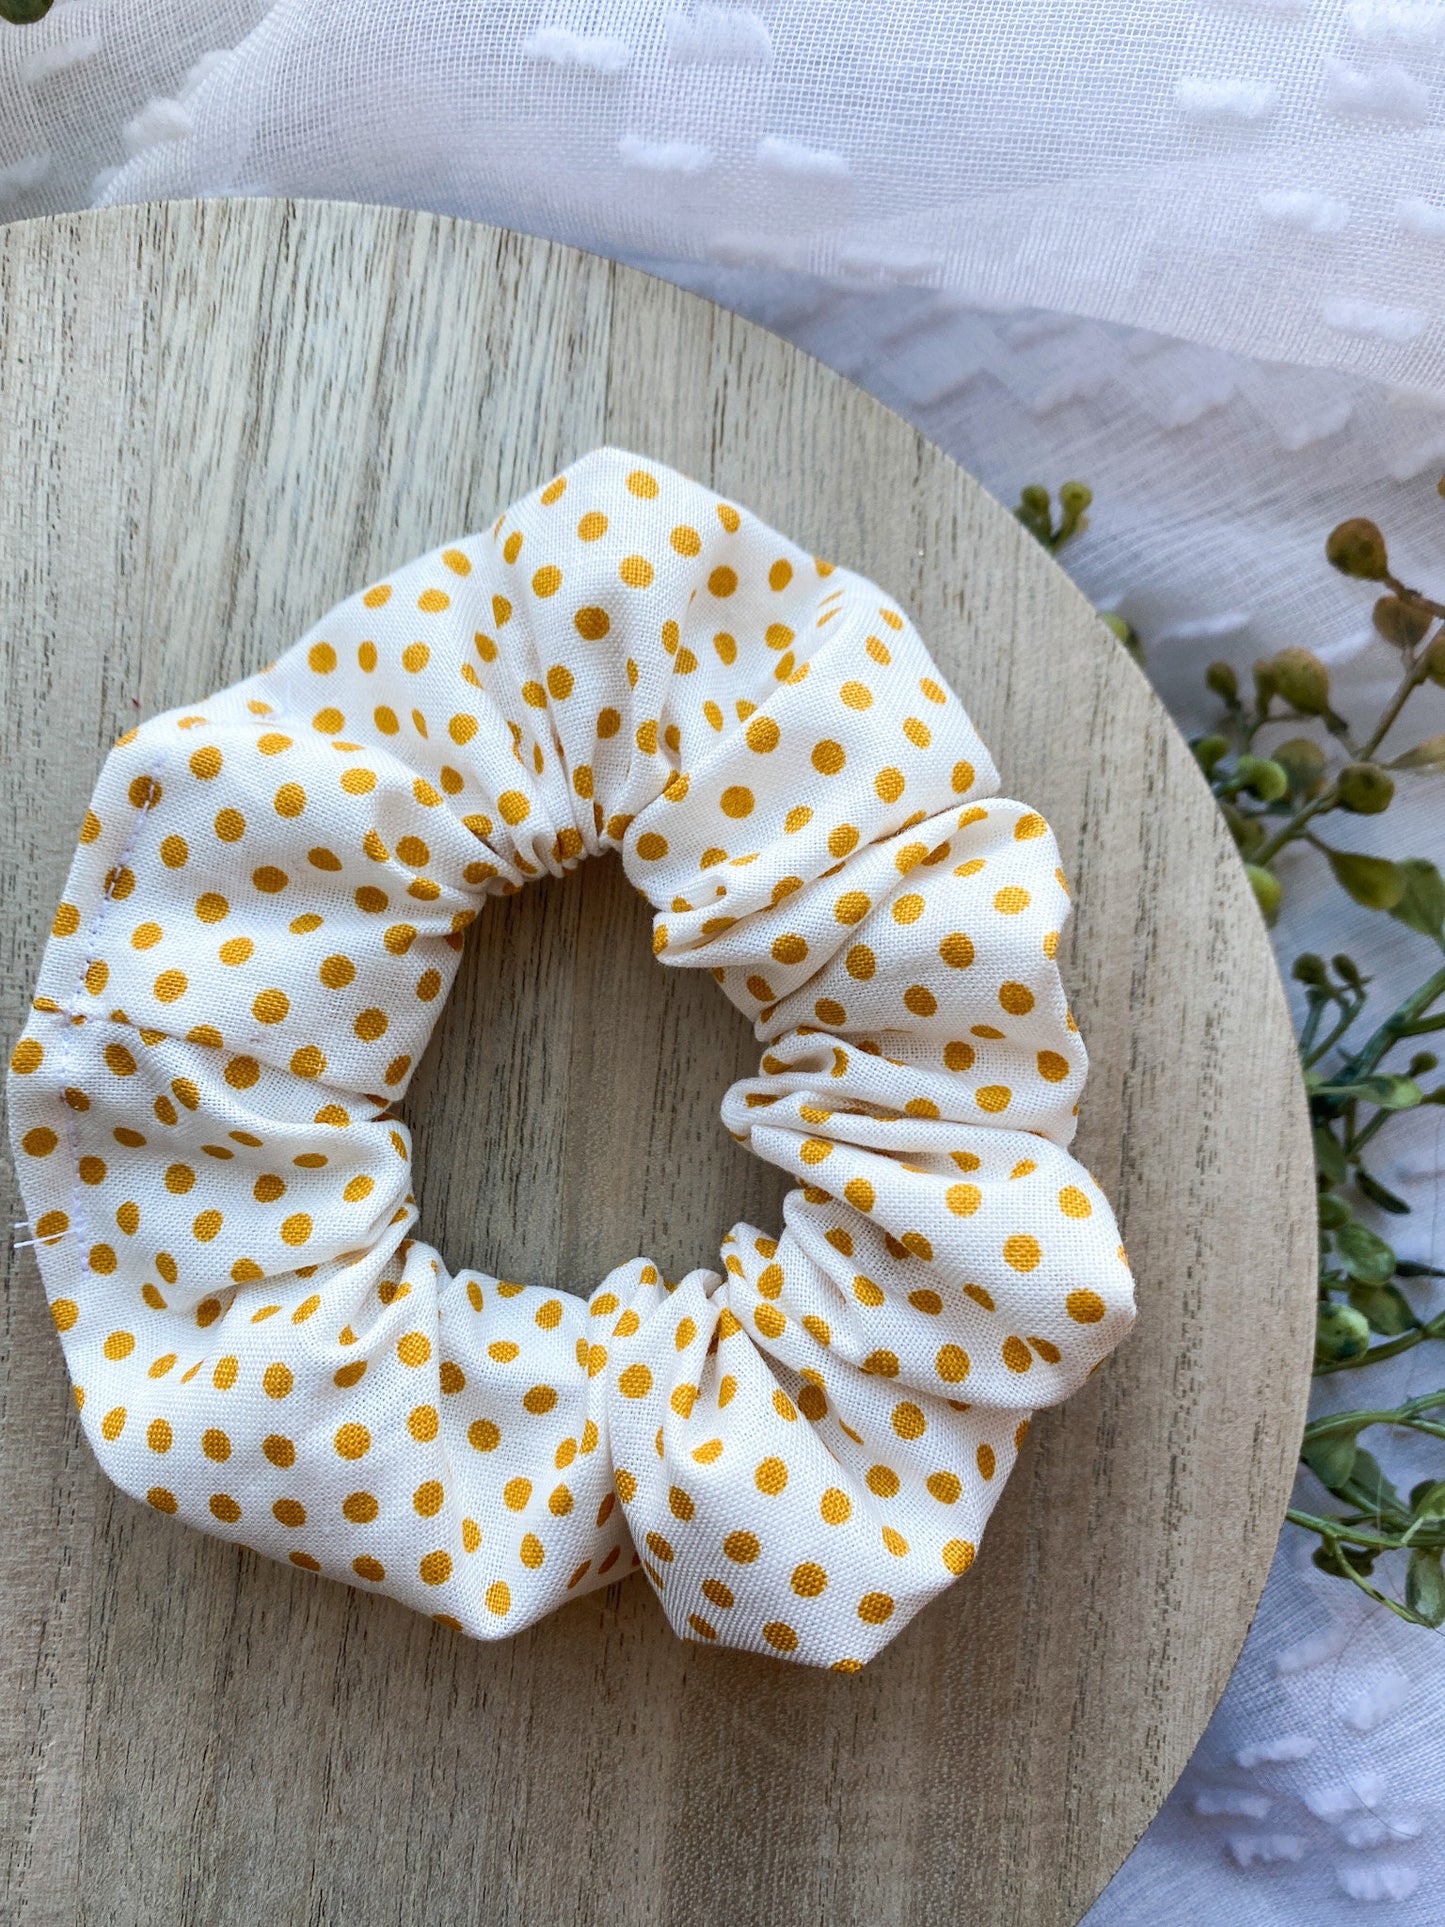 Spring Hair Scrunchy | Stretchy Hair Tie | Cute Fabric Accessory | Dot Fabric | Yellow Polka Dots | Vintage Flowers | 100% Cotton